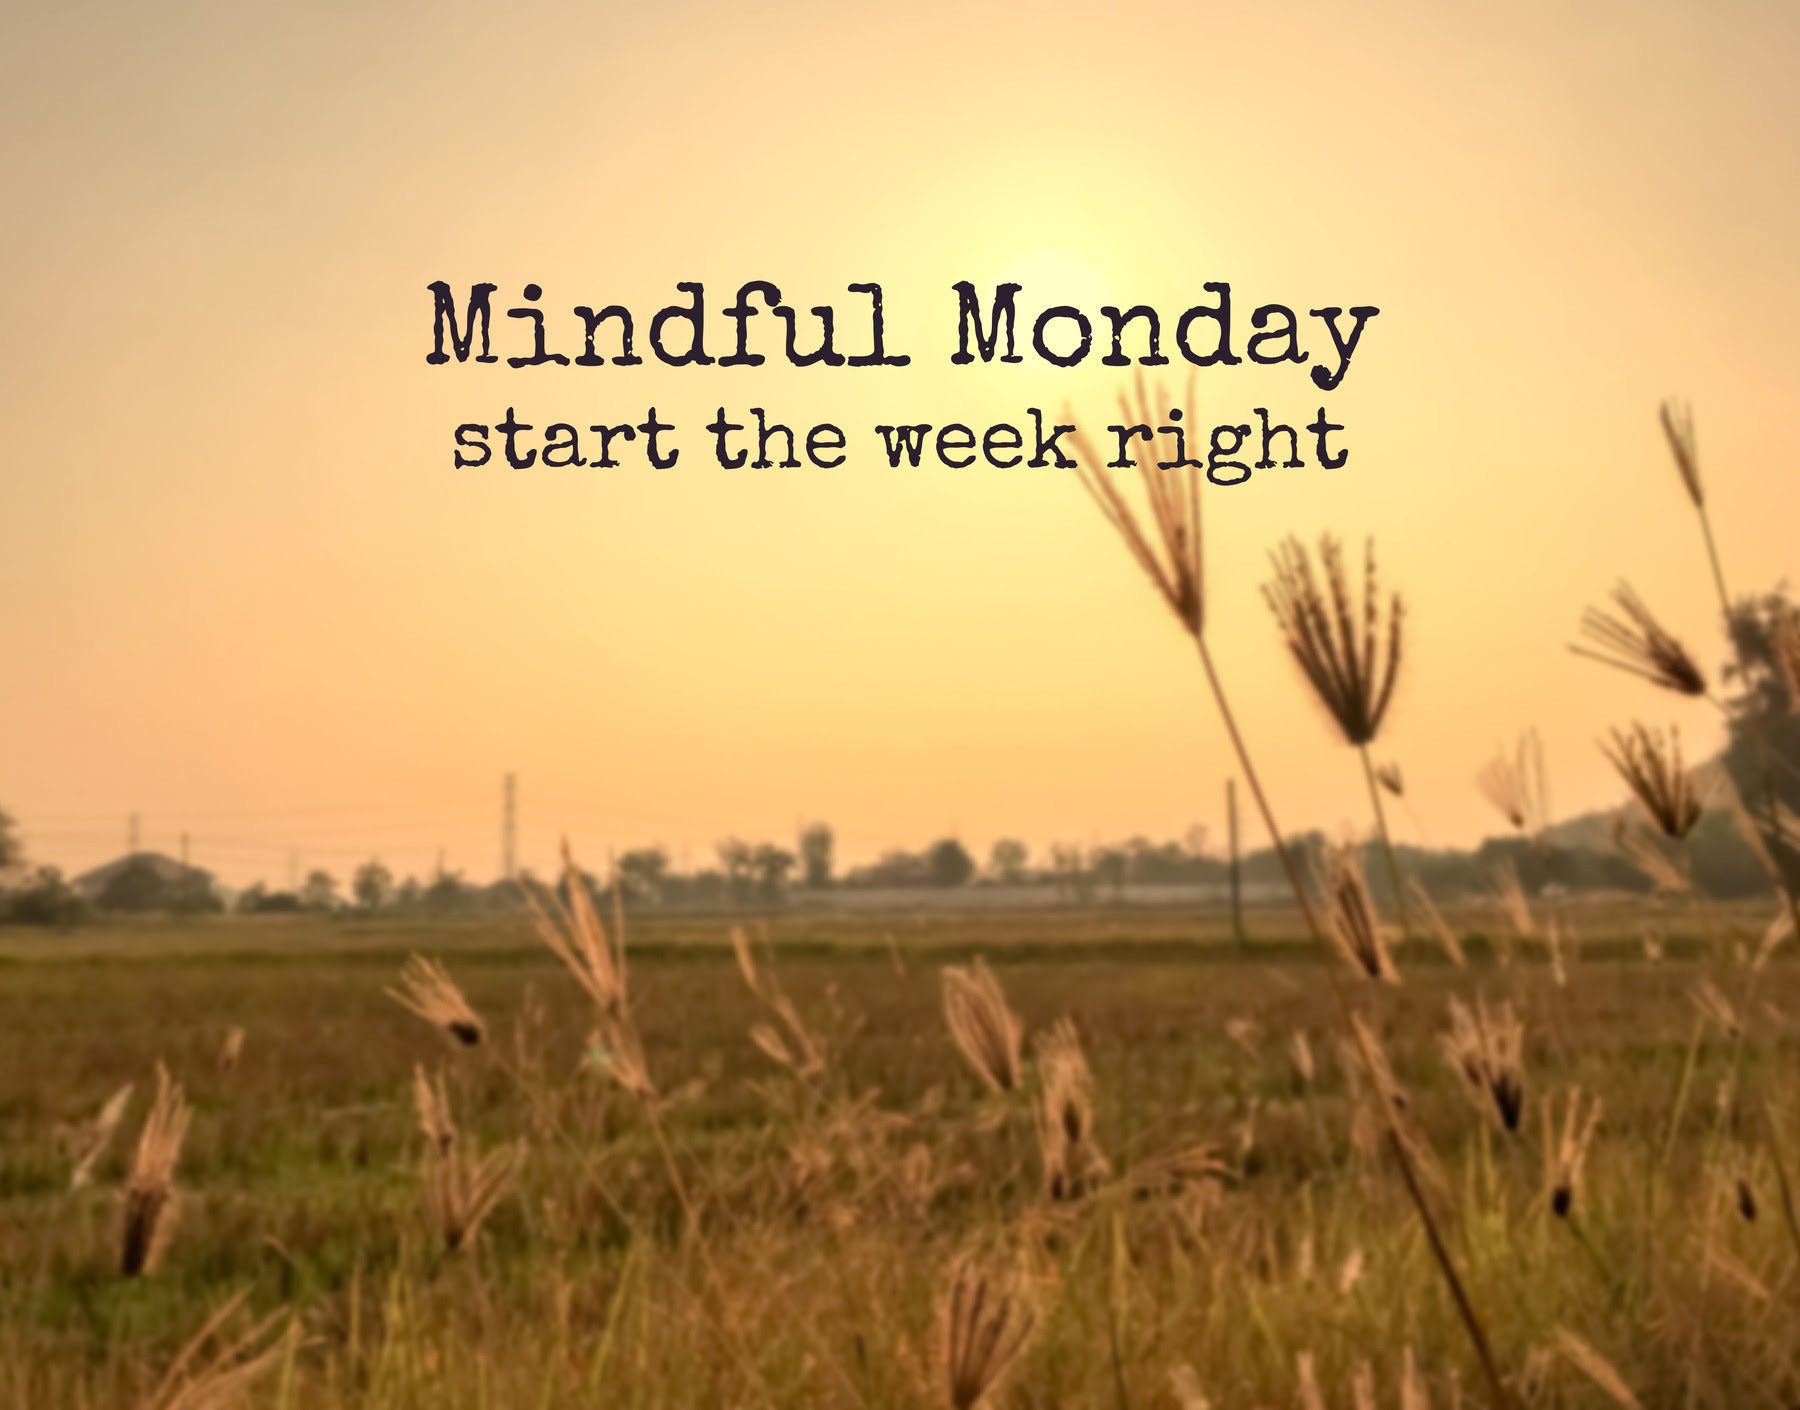 An Introduction to Mindfulness - The Monday Campaigns